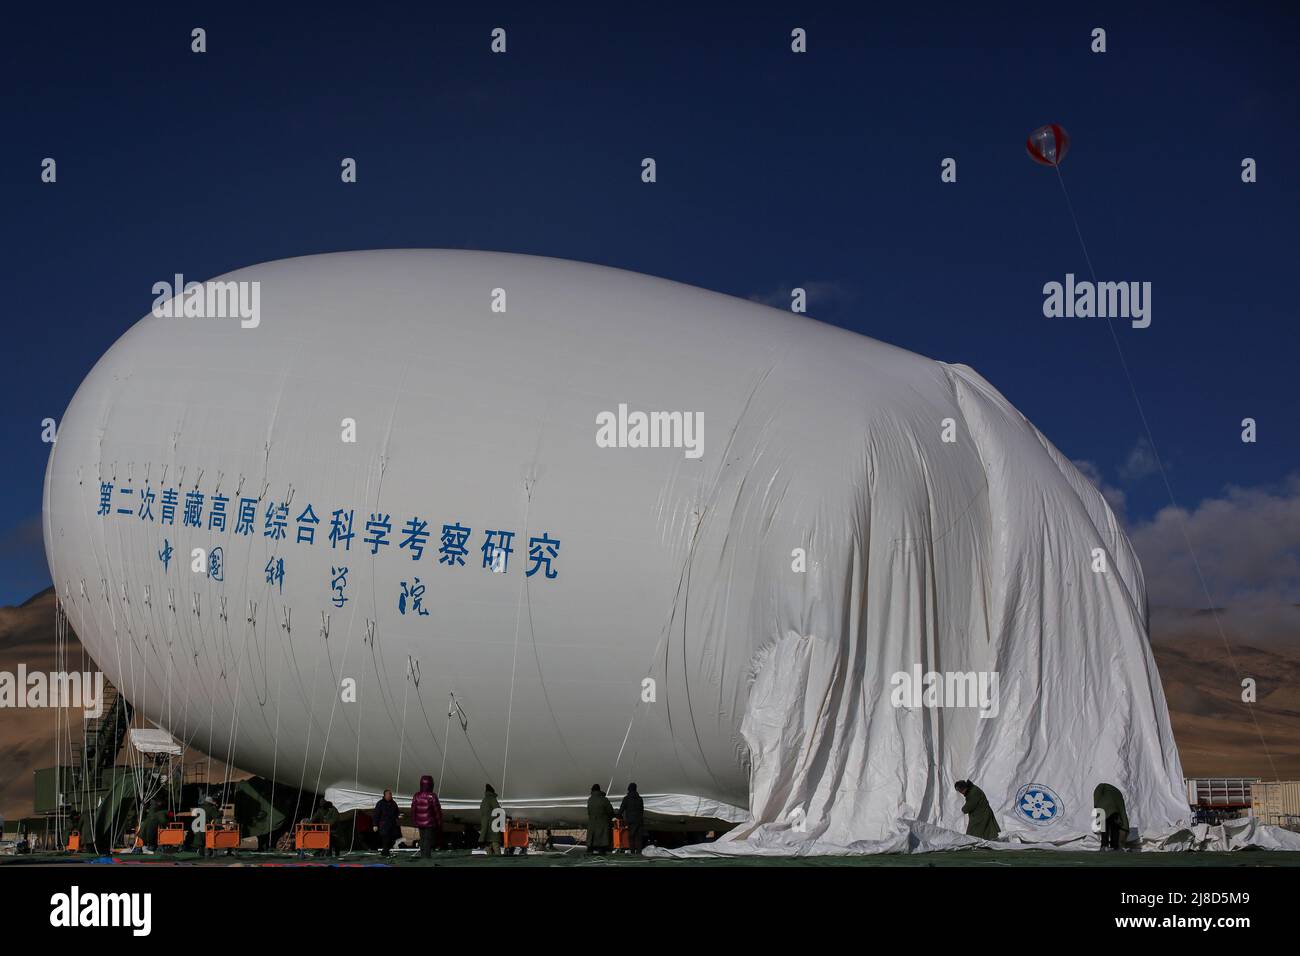 (220515) -- MOUNT QOMOLANGMA BASE CAMP, May 15, 2022 (Xinhua) -- Floating airship 'Jimu No.1' type III is being inflated in Zhaxizom Township of Tingri County, southwest China's Tibet Autonomous Region, May 12, 2022. China's self-developed floating airship, designed for atmosphere observation, reached a record altitude of 9,032 meters in Tibet Autonomous Region on Sunday, according to its developer.   Developed by the Aerospace Information Research Institute of the Chinese Academy of Sciences (CAS), the floating airship 'Jimu No.1' type III has a volume of 9,060 cubic meters. (Xinhua/Jiang Fan Stock Photo